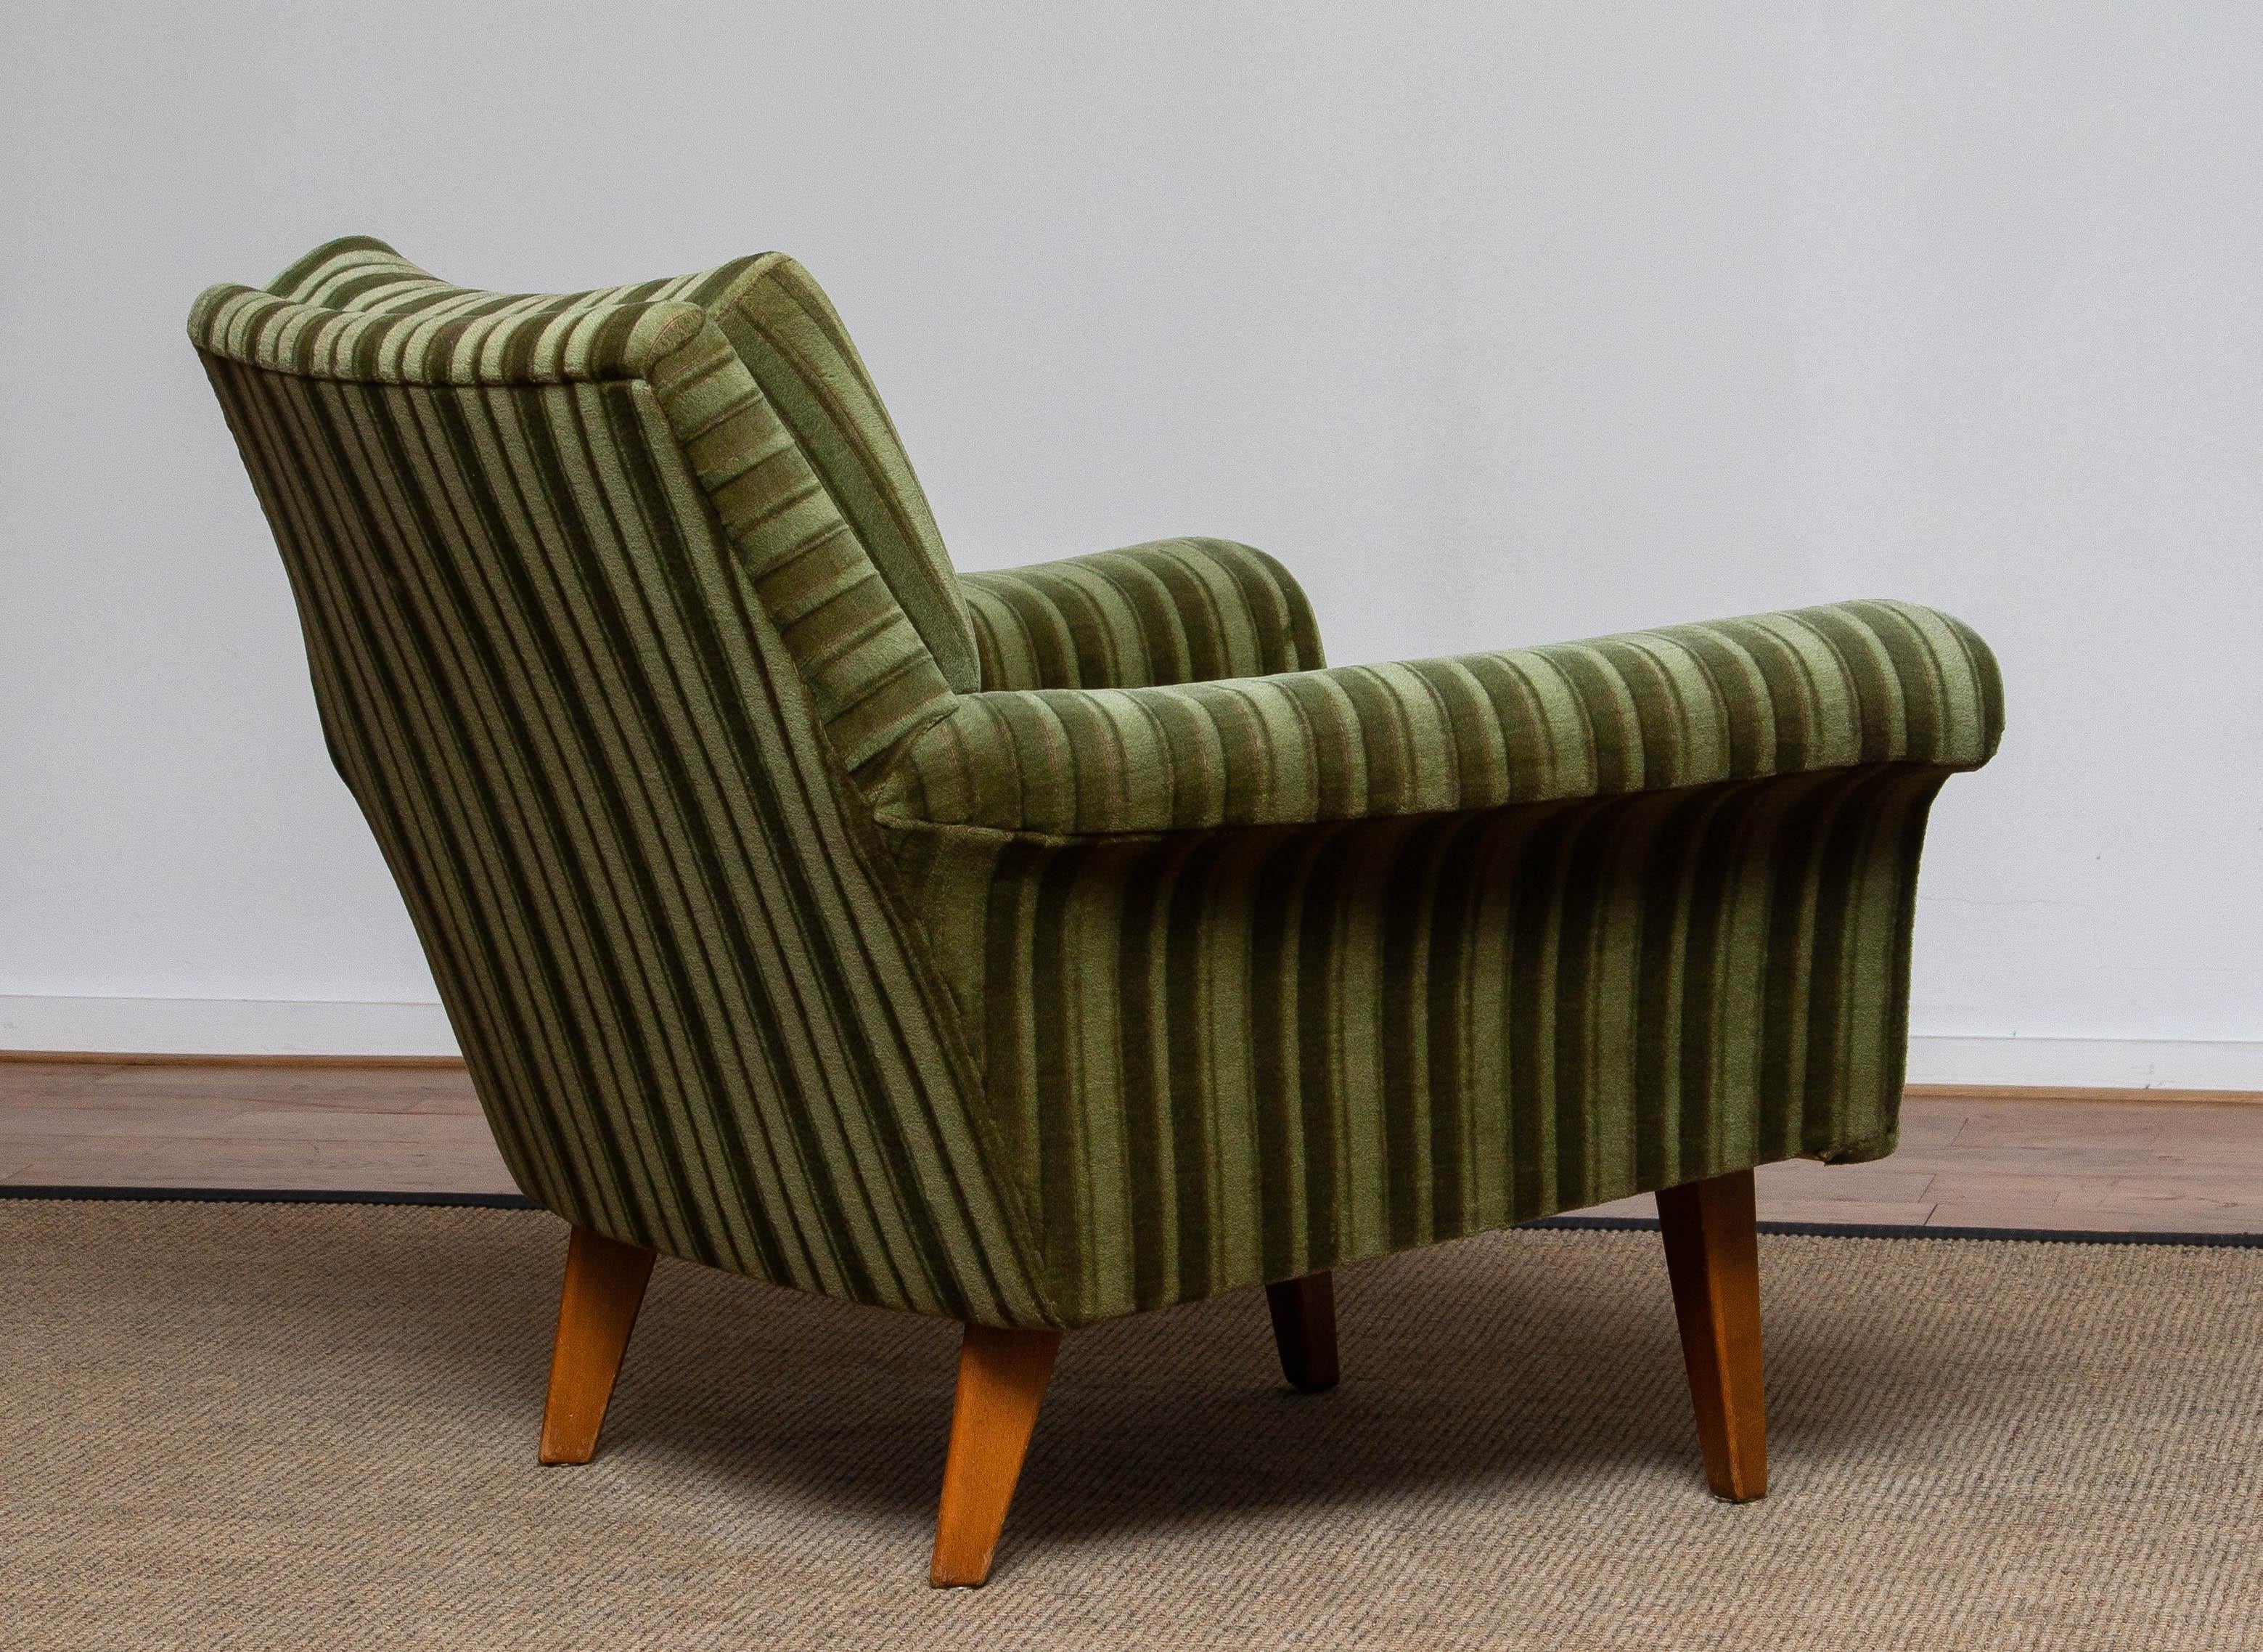 Absolutely stunning lounge / easy / club chair from the 1950's made in Italy stil upholstered with the original green velvet / velours fabric. Supports good and sits very comfortable.
Overall in very good condition.
Please note that we have two